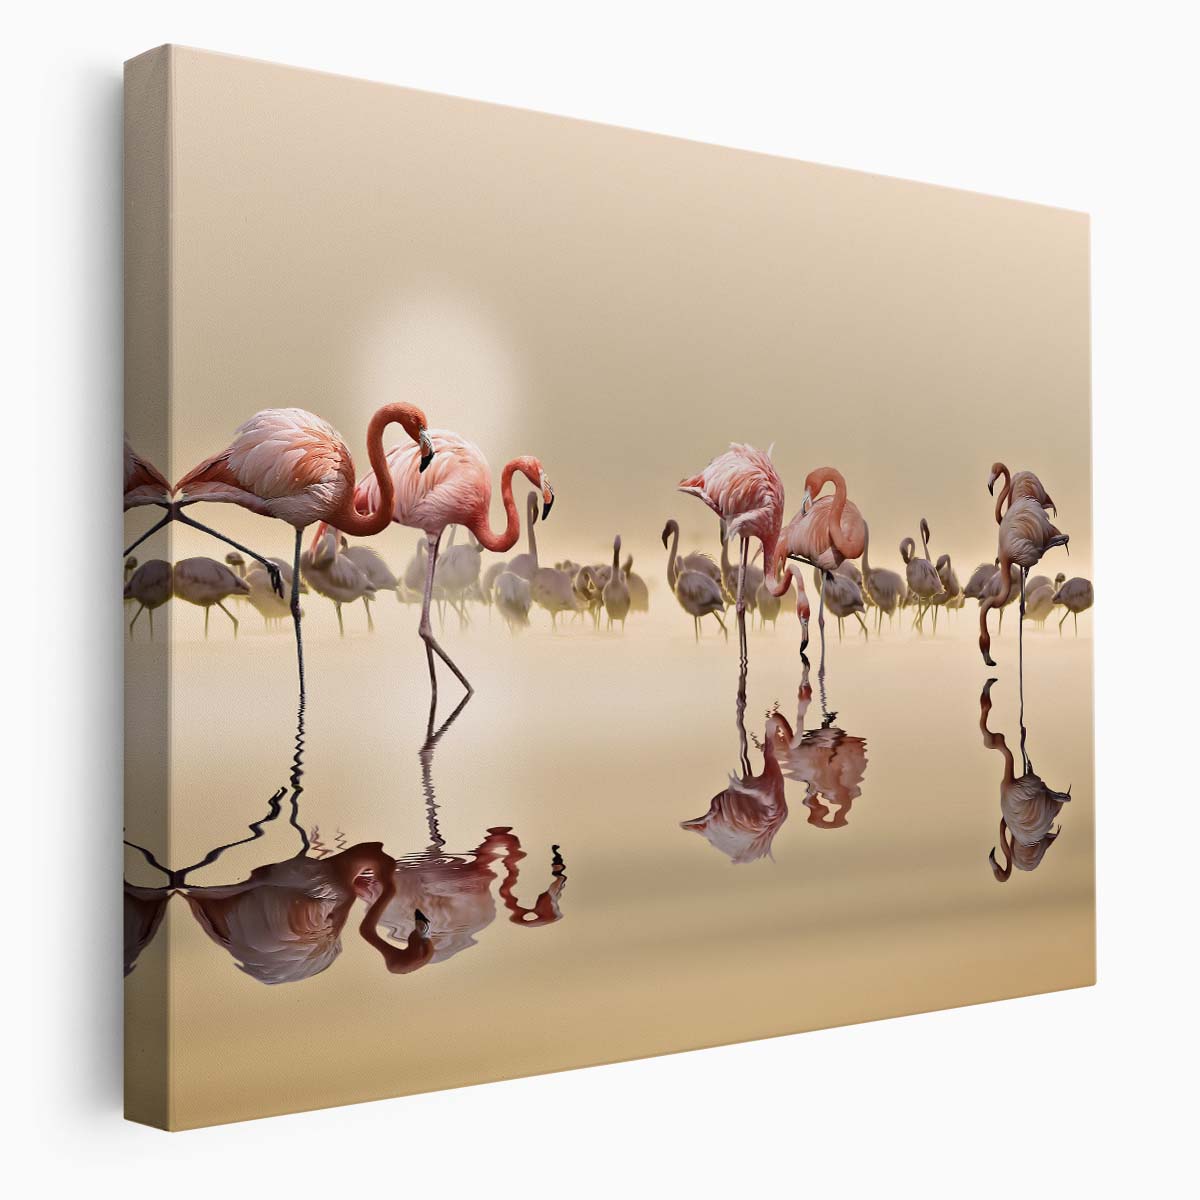 Romantic Pink Flamingo Pair in Golden Light Wall Art by Luxuriance Designs. Made in USA.